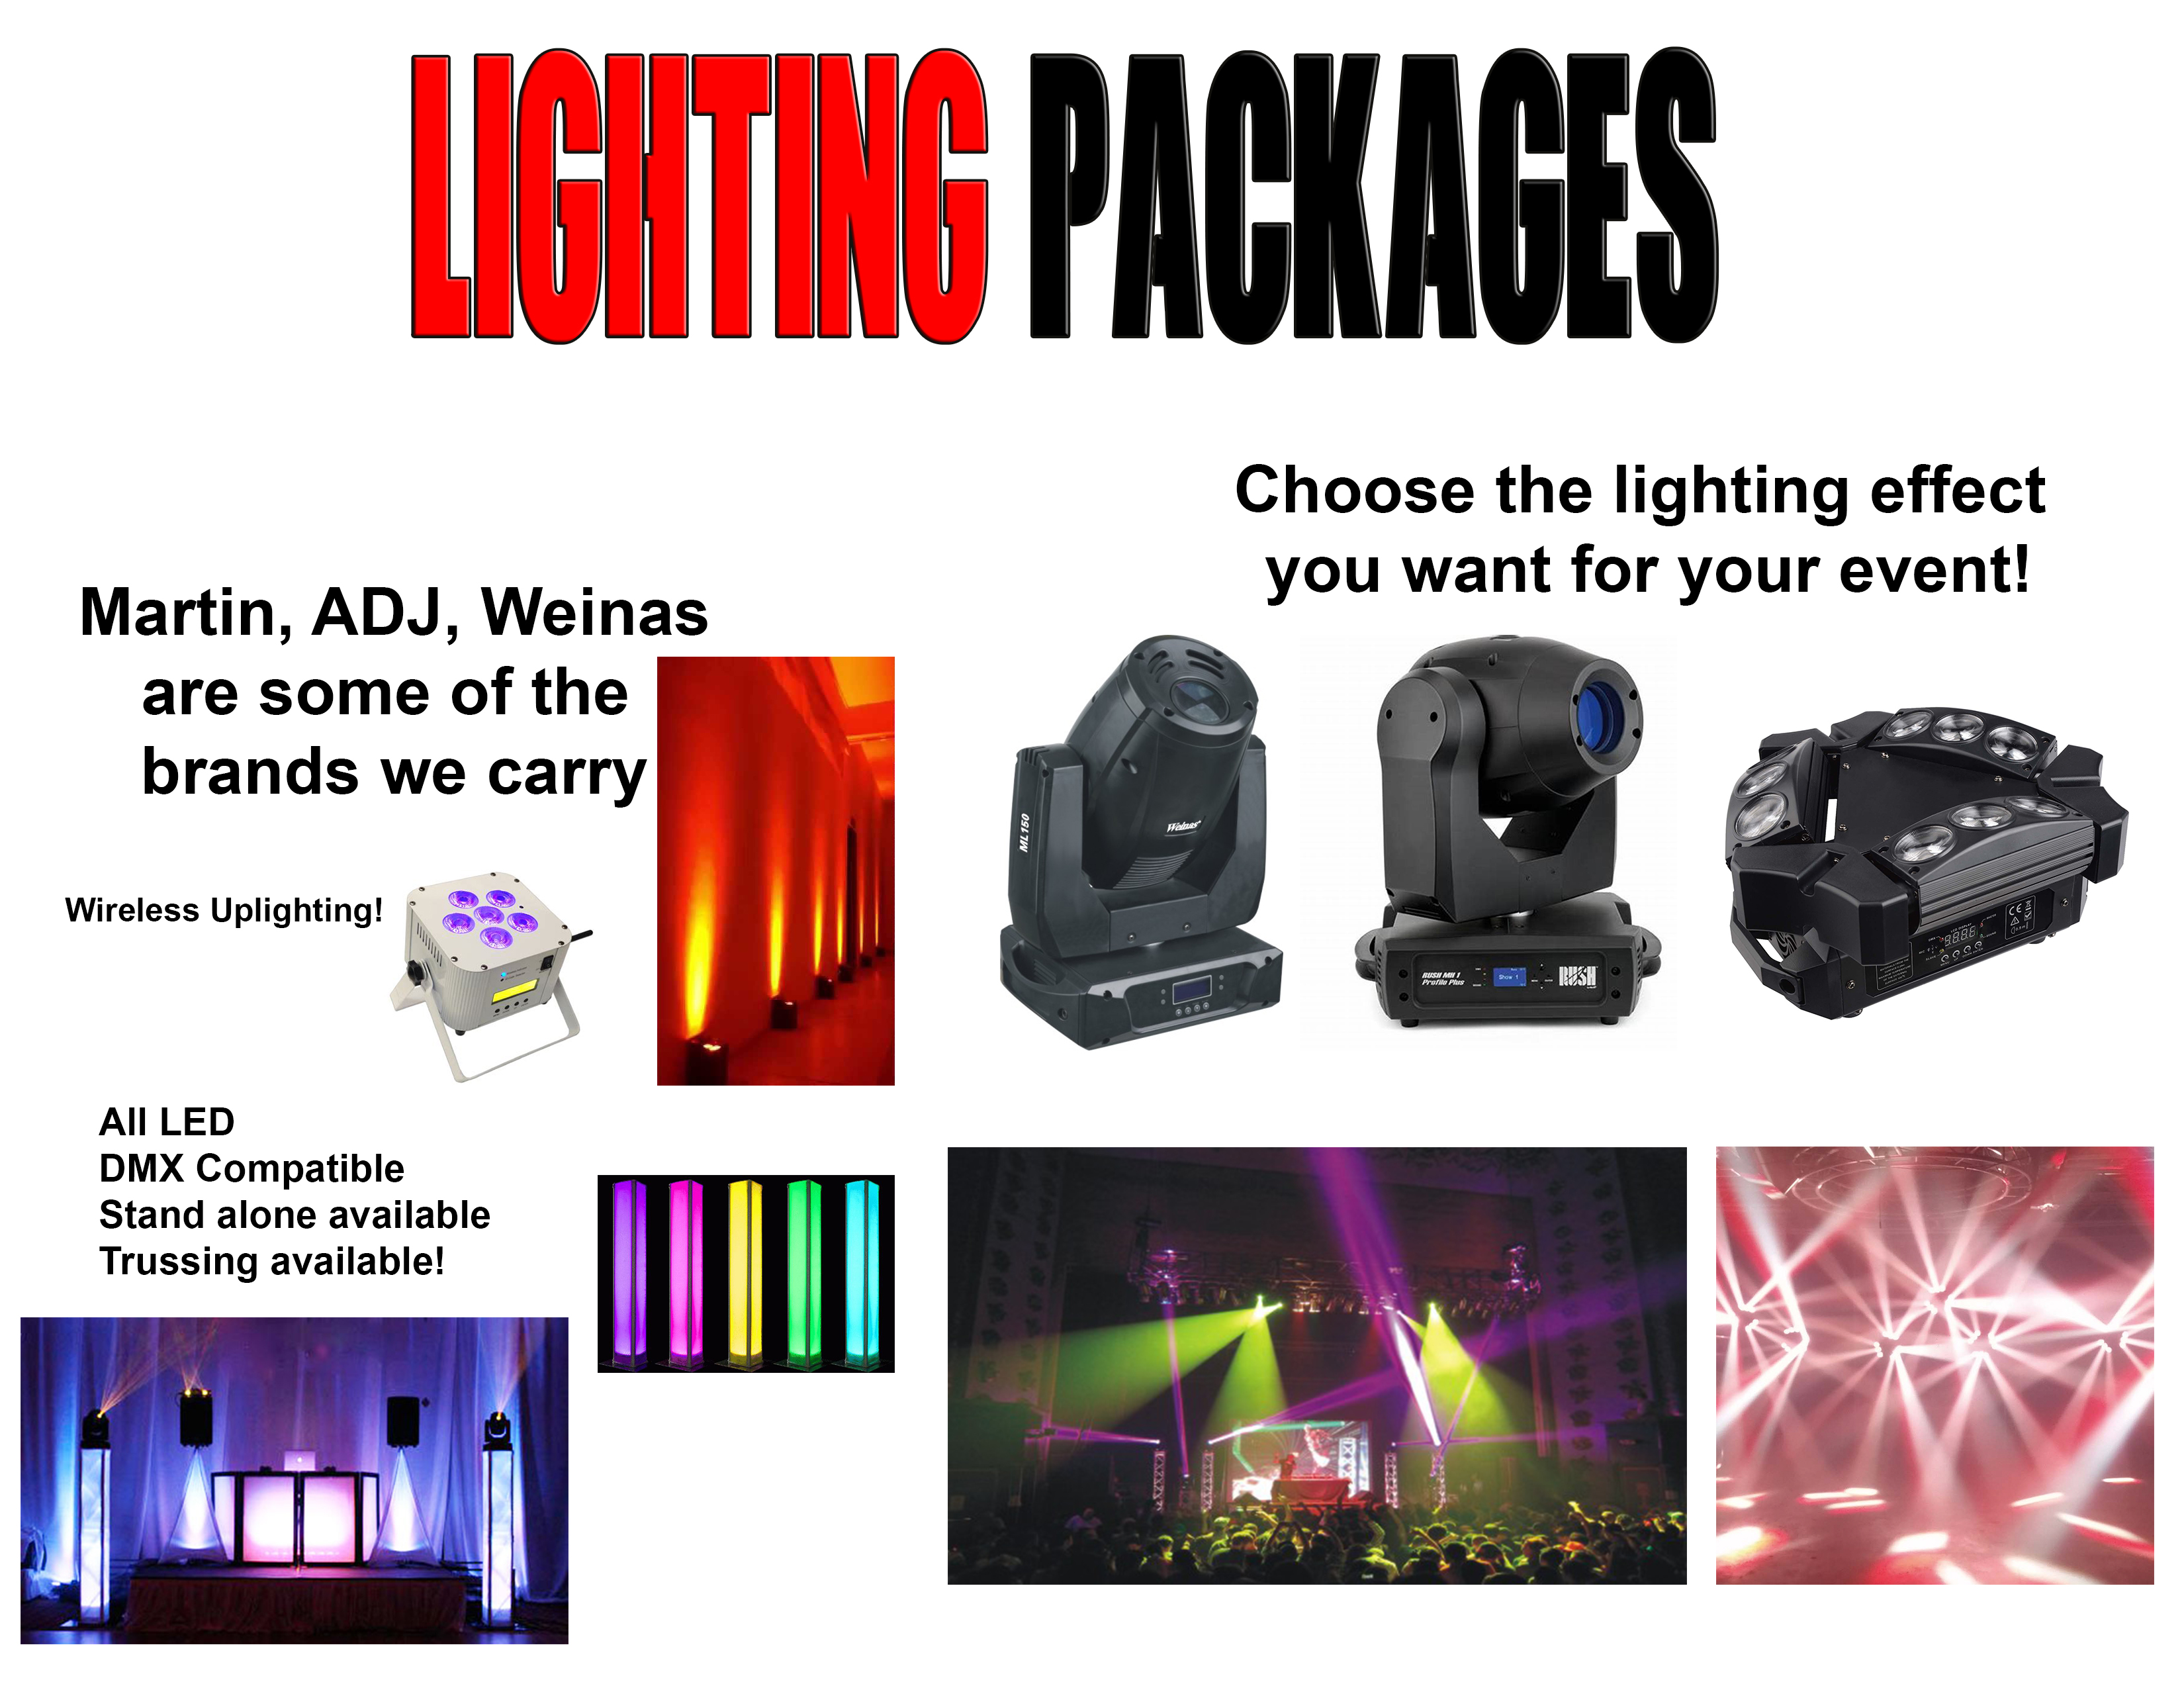 Lighting Packages